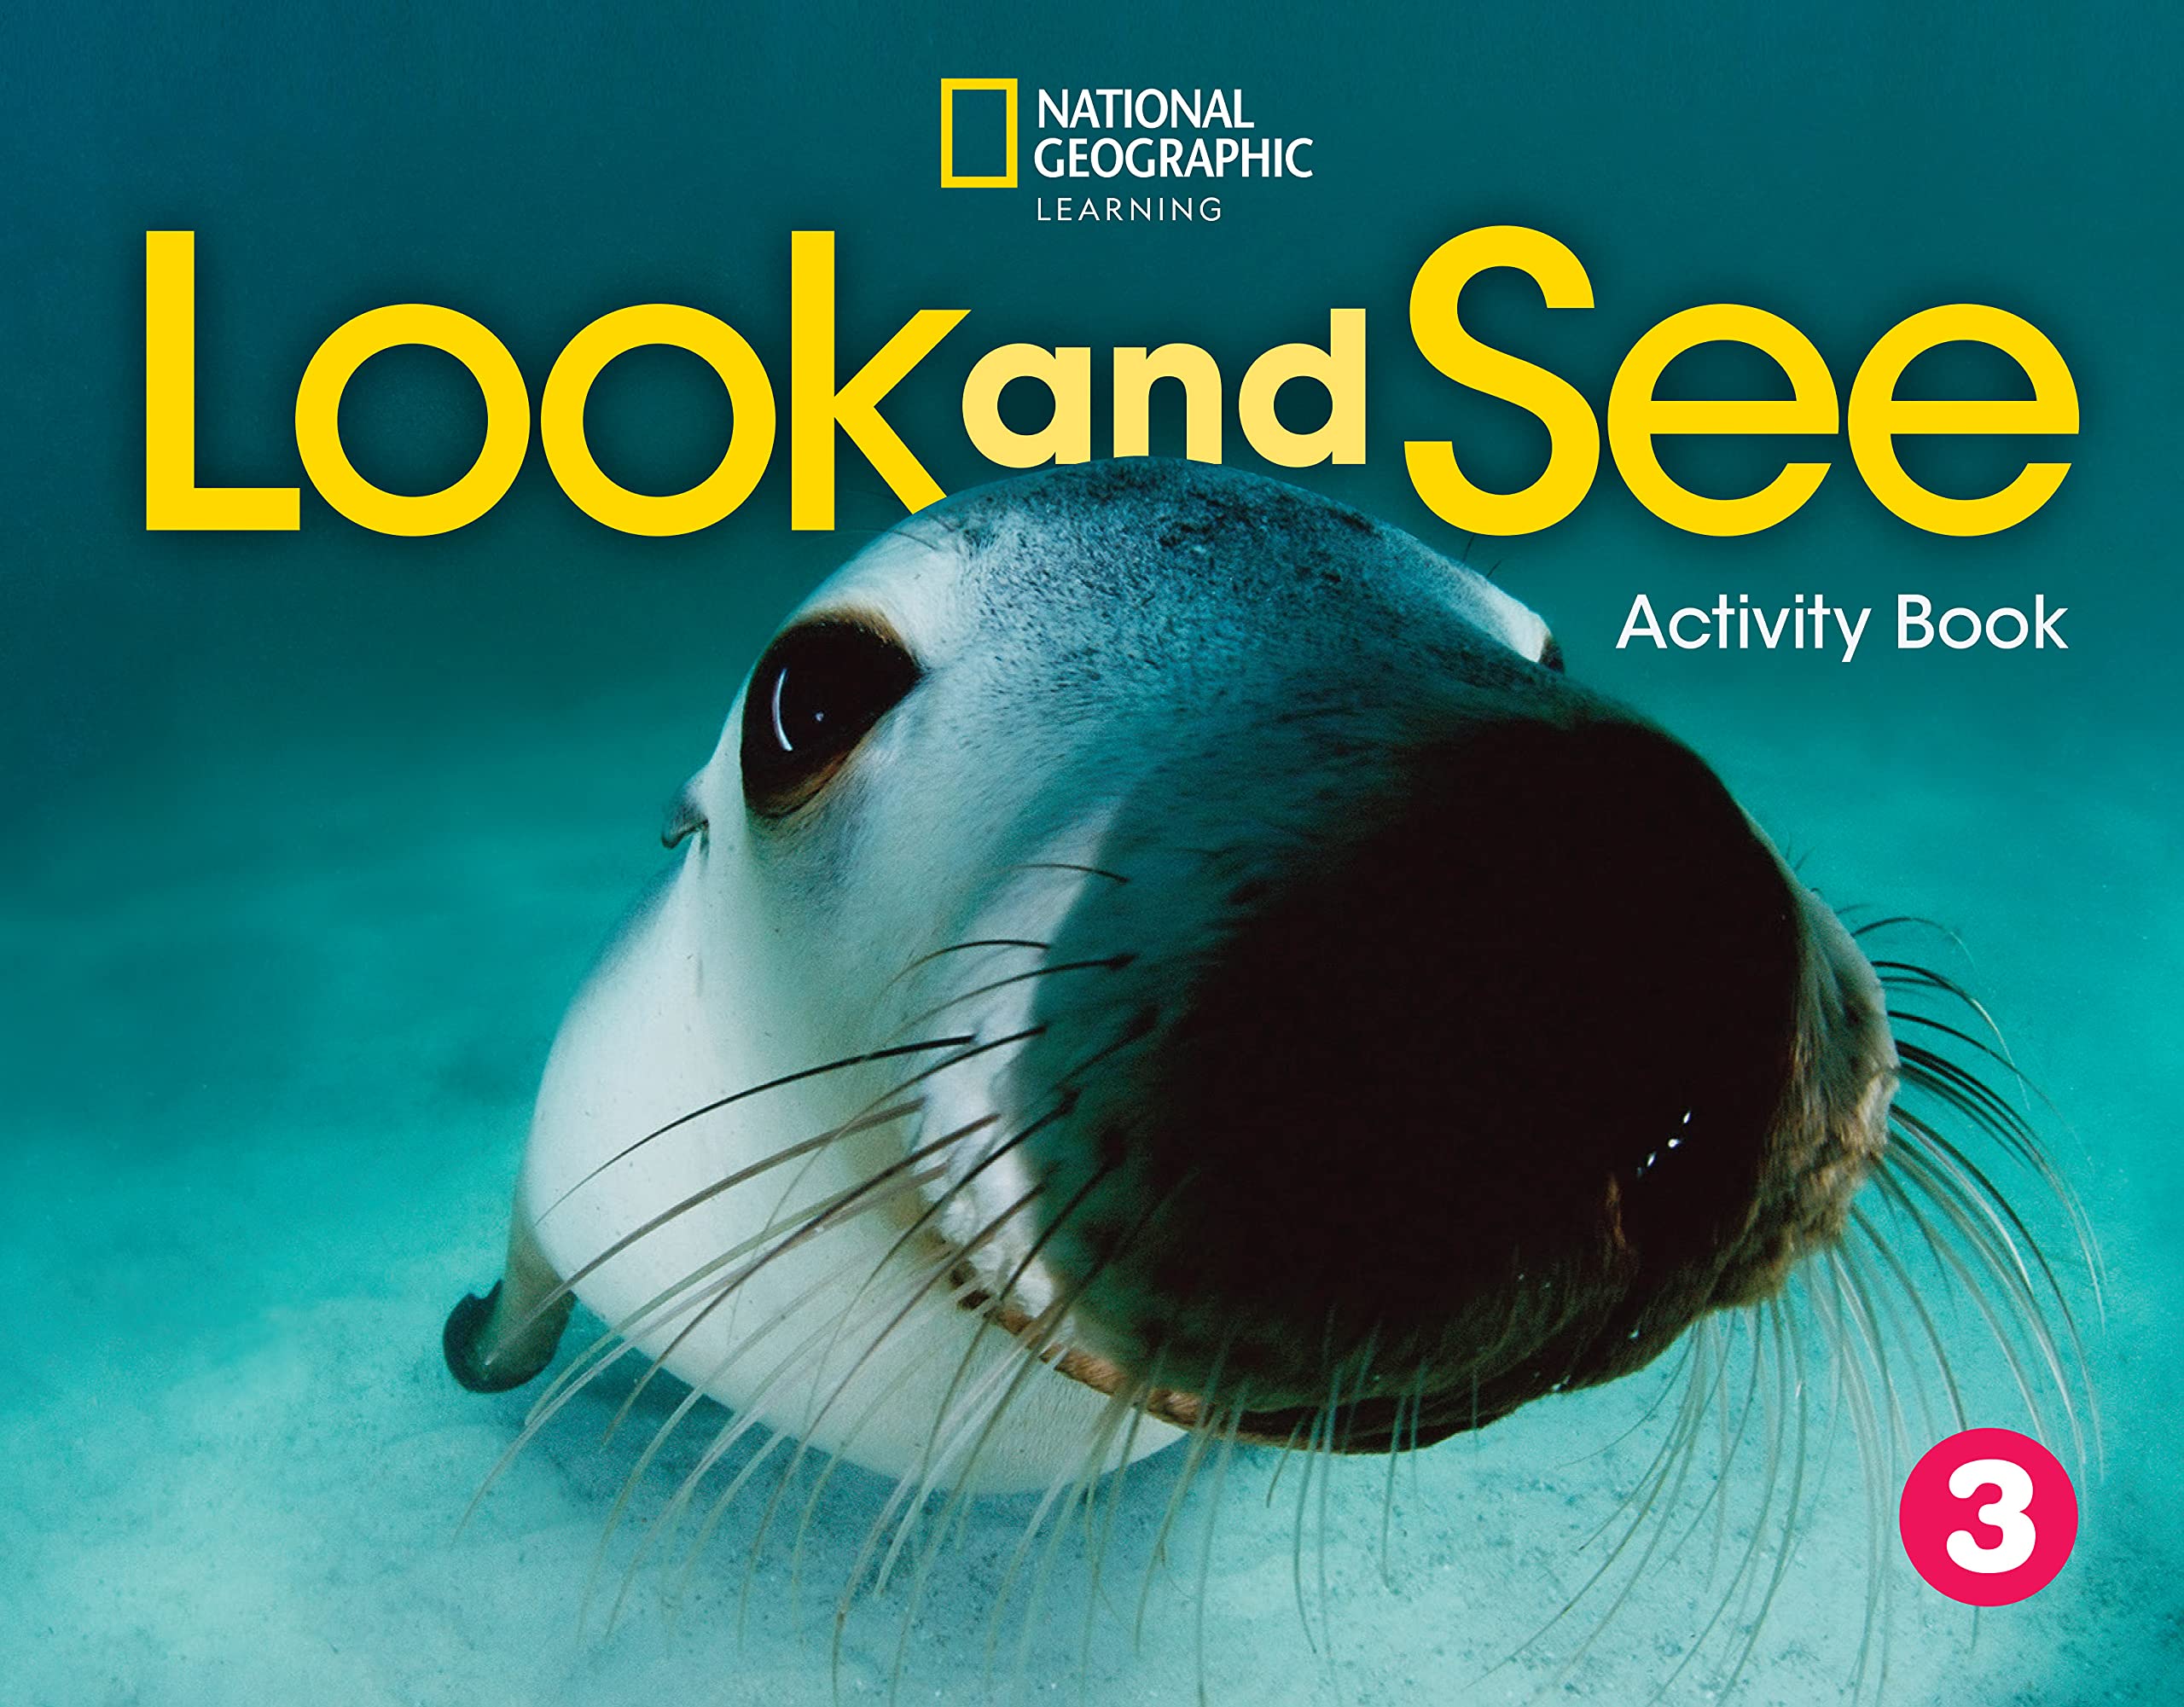 Look and See 3 - Activity Book(Ασκήσεων Μαθητή)(British Edition) - National Geographic Learning(Cengage)